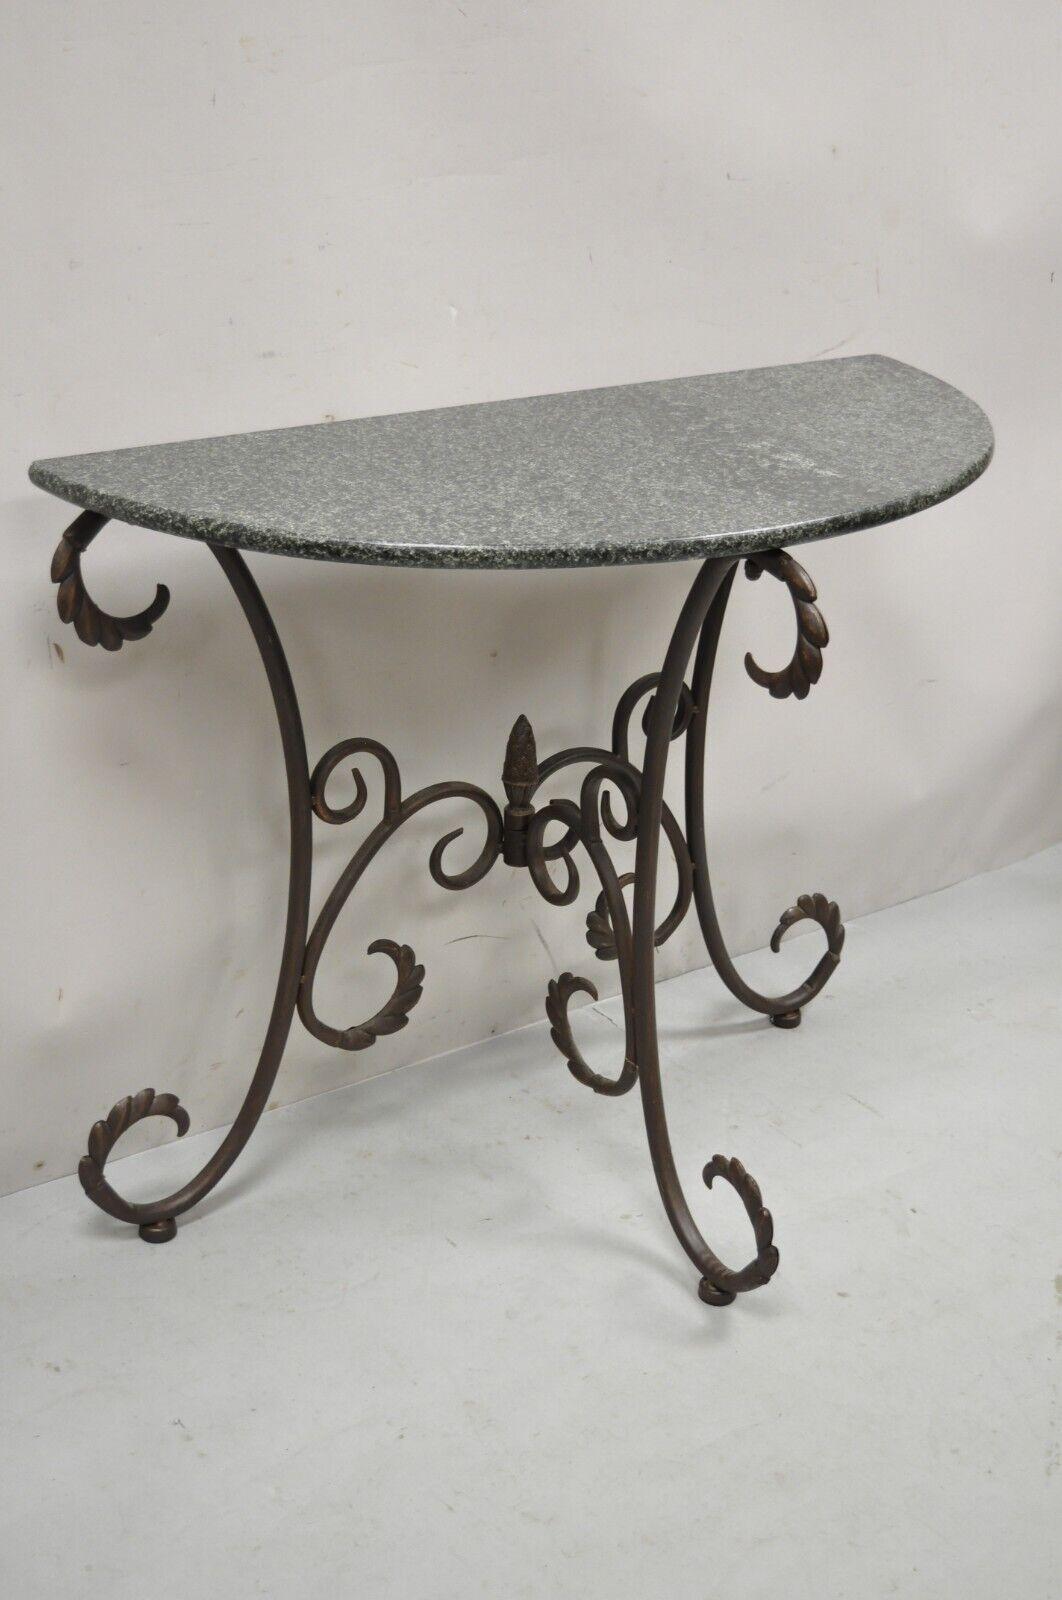 Art Nouveau French Style Metal Demilune half round marble console table. Item features demilune half round marble top, iron scrolling base, great style and form. Circa late 20th Century - Early 21st Century. Measurements: 29.5